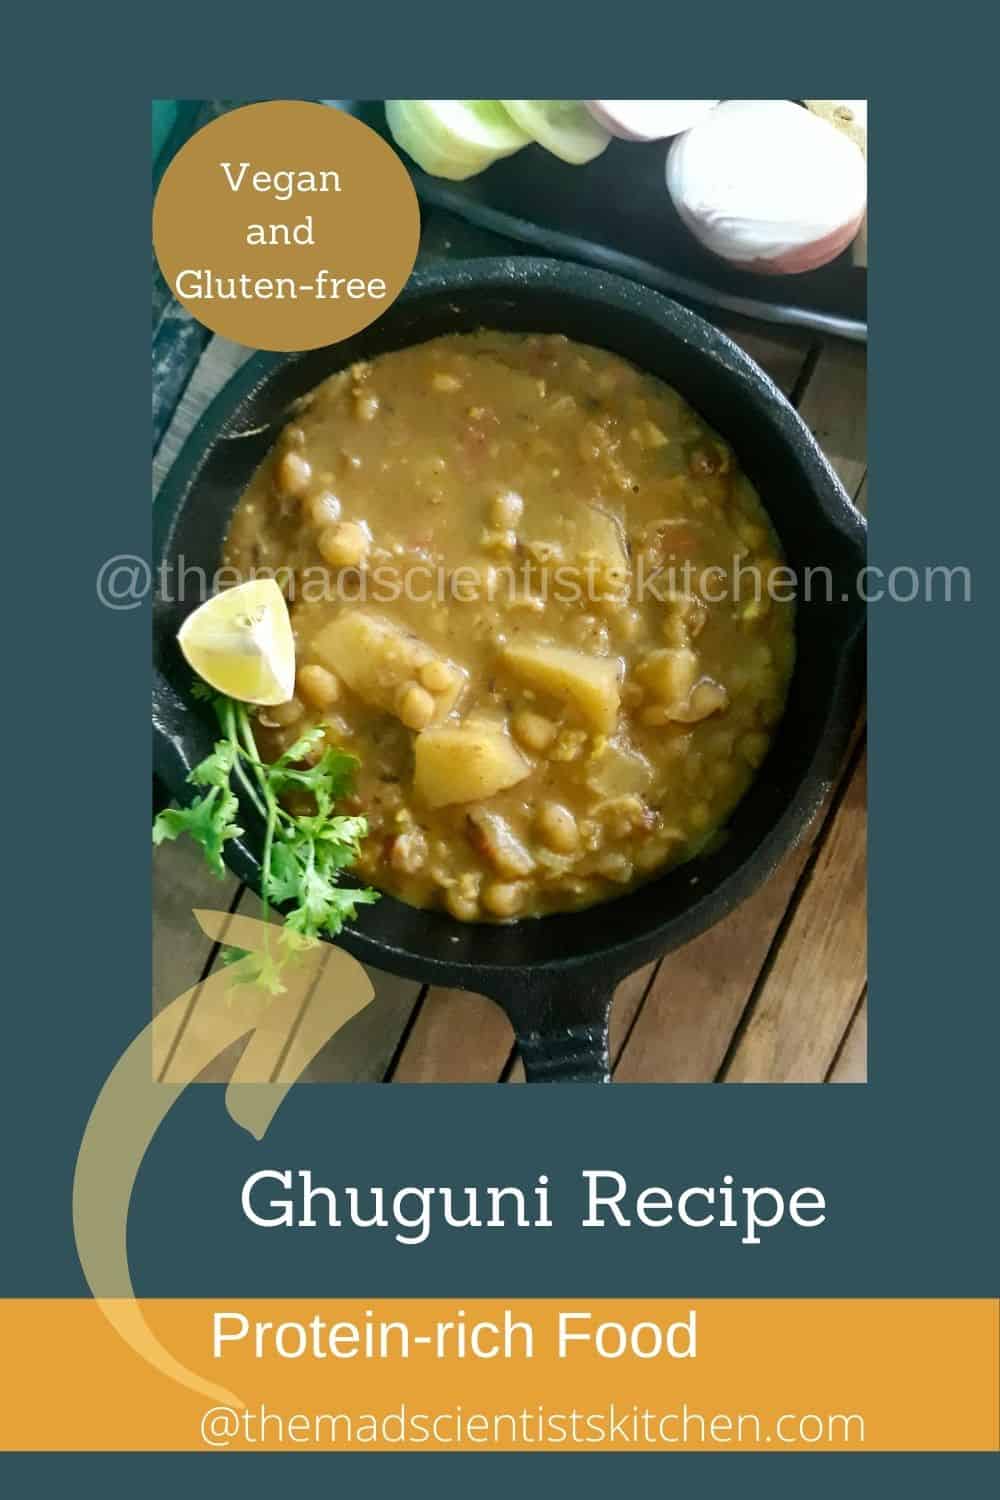 Ghuguni serve as a delicious Curry or Snack